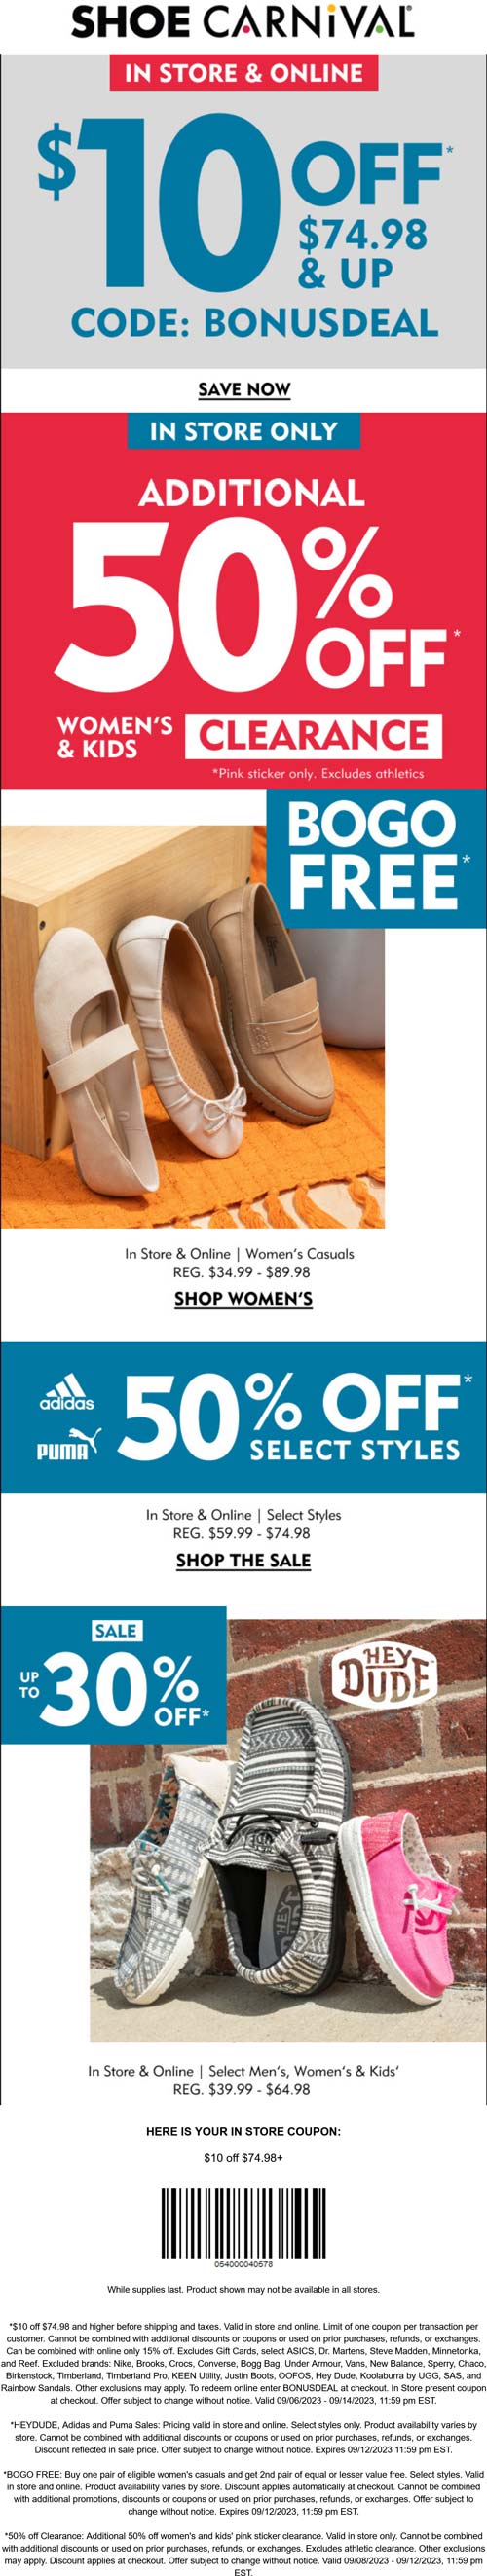 Shoe Carnival stores Coupon  50% off clearance & $10 off $75 at Shoe Carnival, or online via promo code BONUSDEAL #shoecarnival 